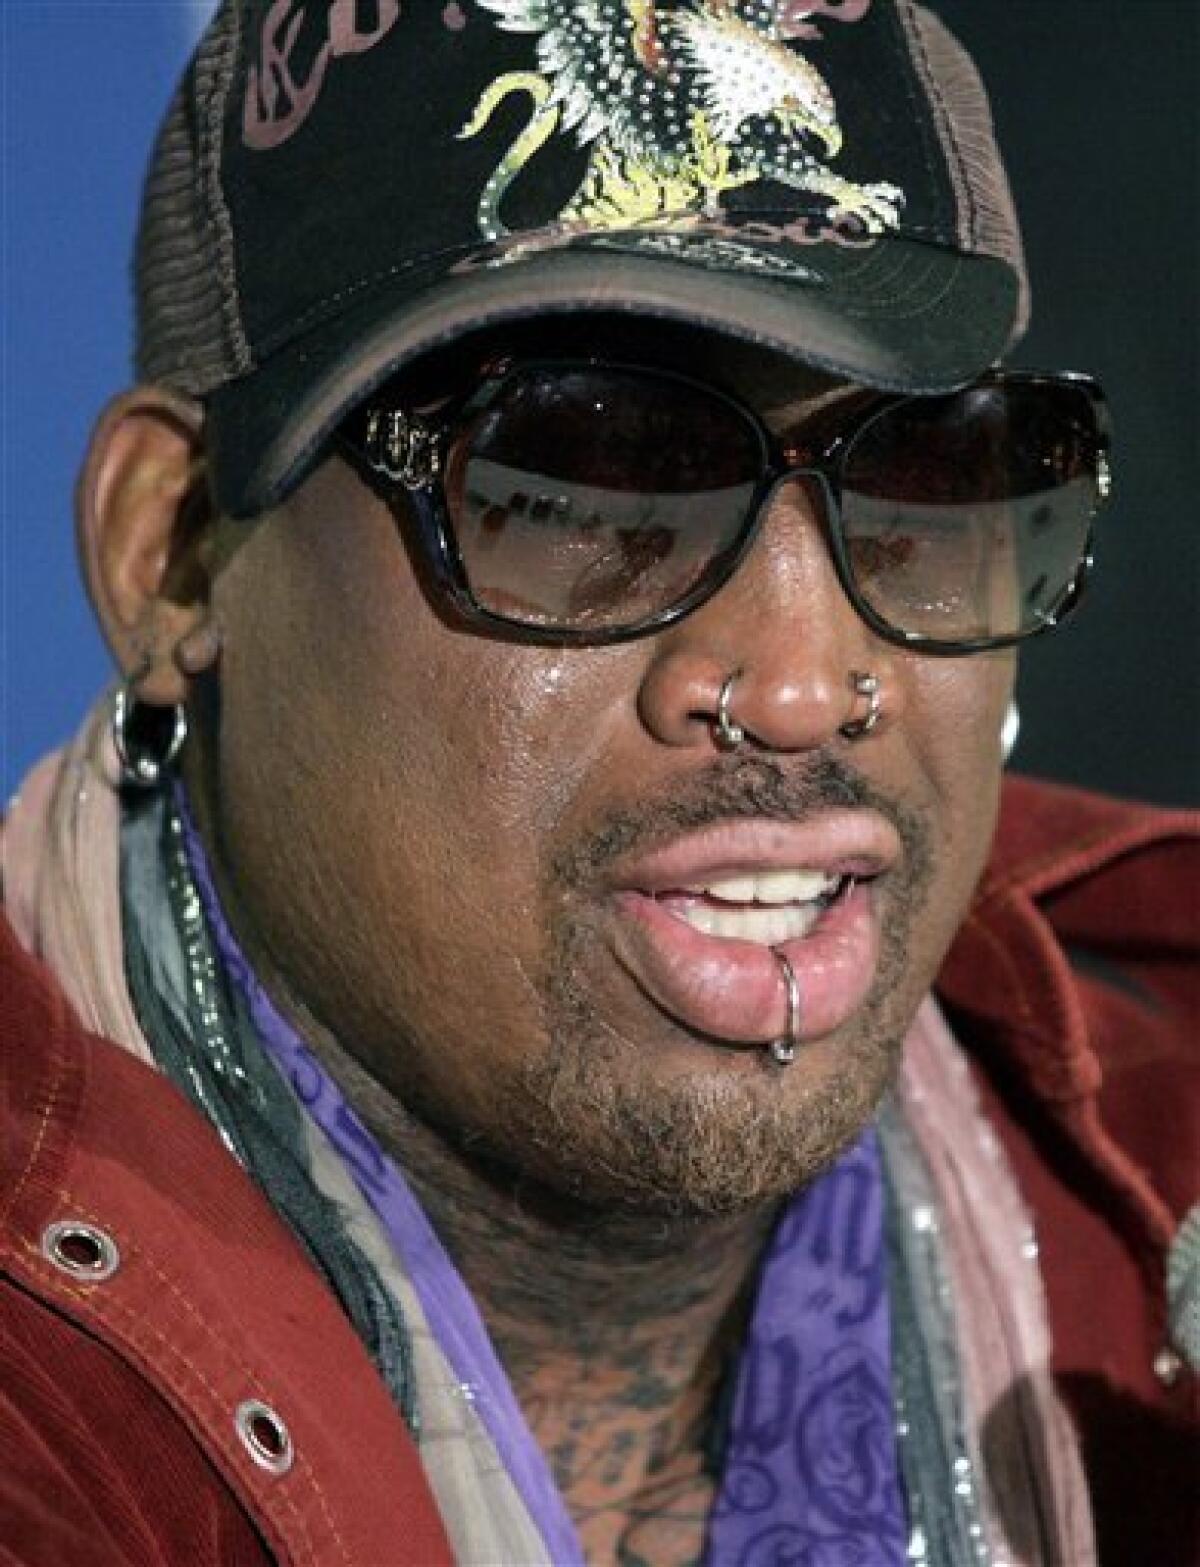 Pistons to retire Dennis Rodman's jersey during halftime ceremony on April  1 